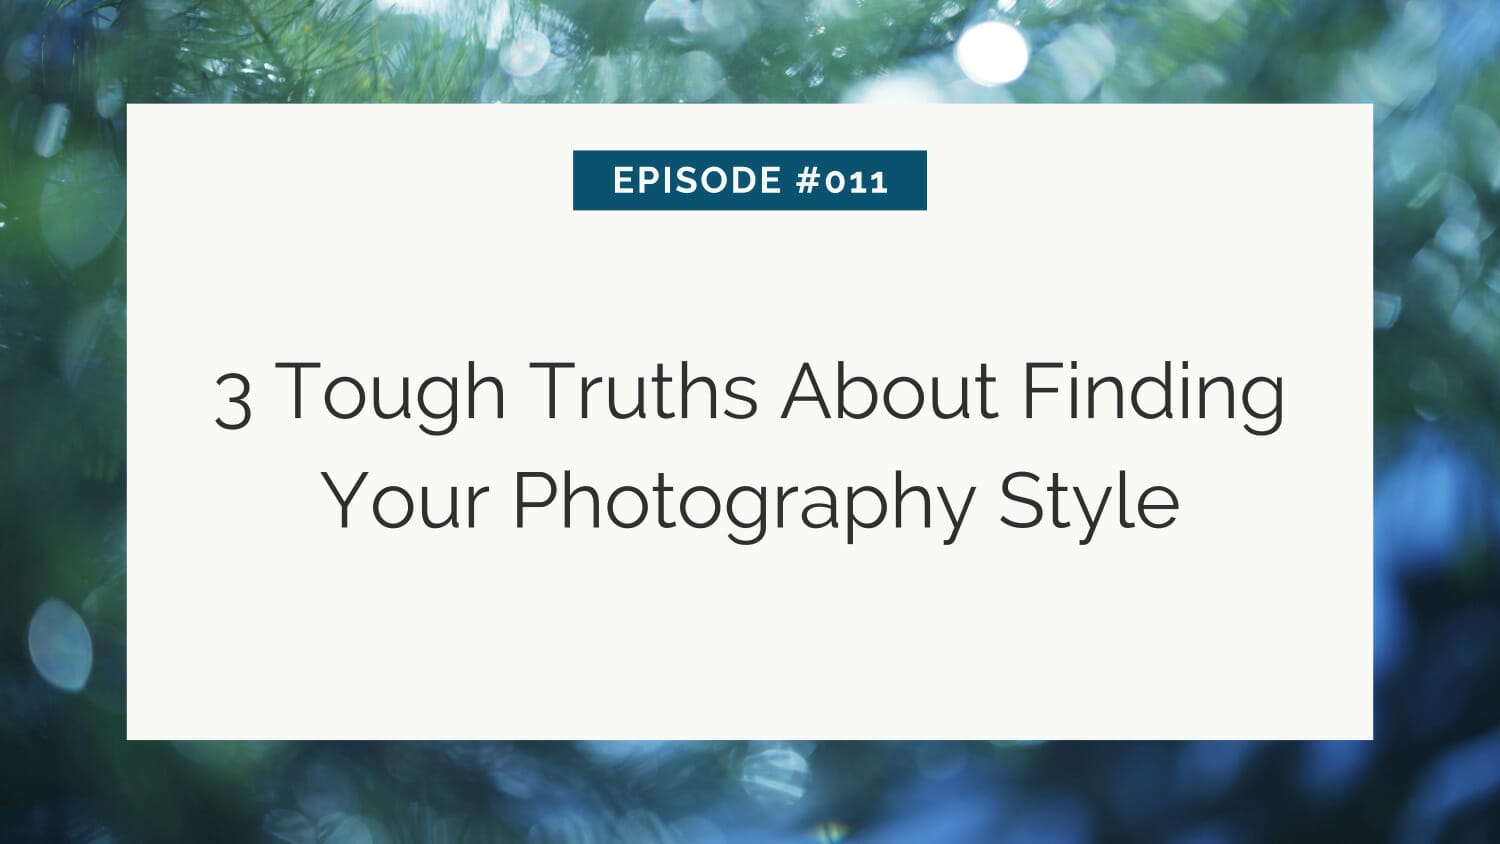 Title slide for a podcast or presentation episode discussing "3 tough truths about finding your photography style.